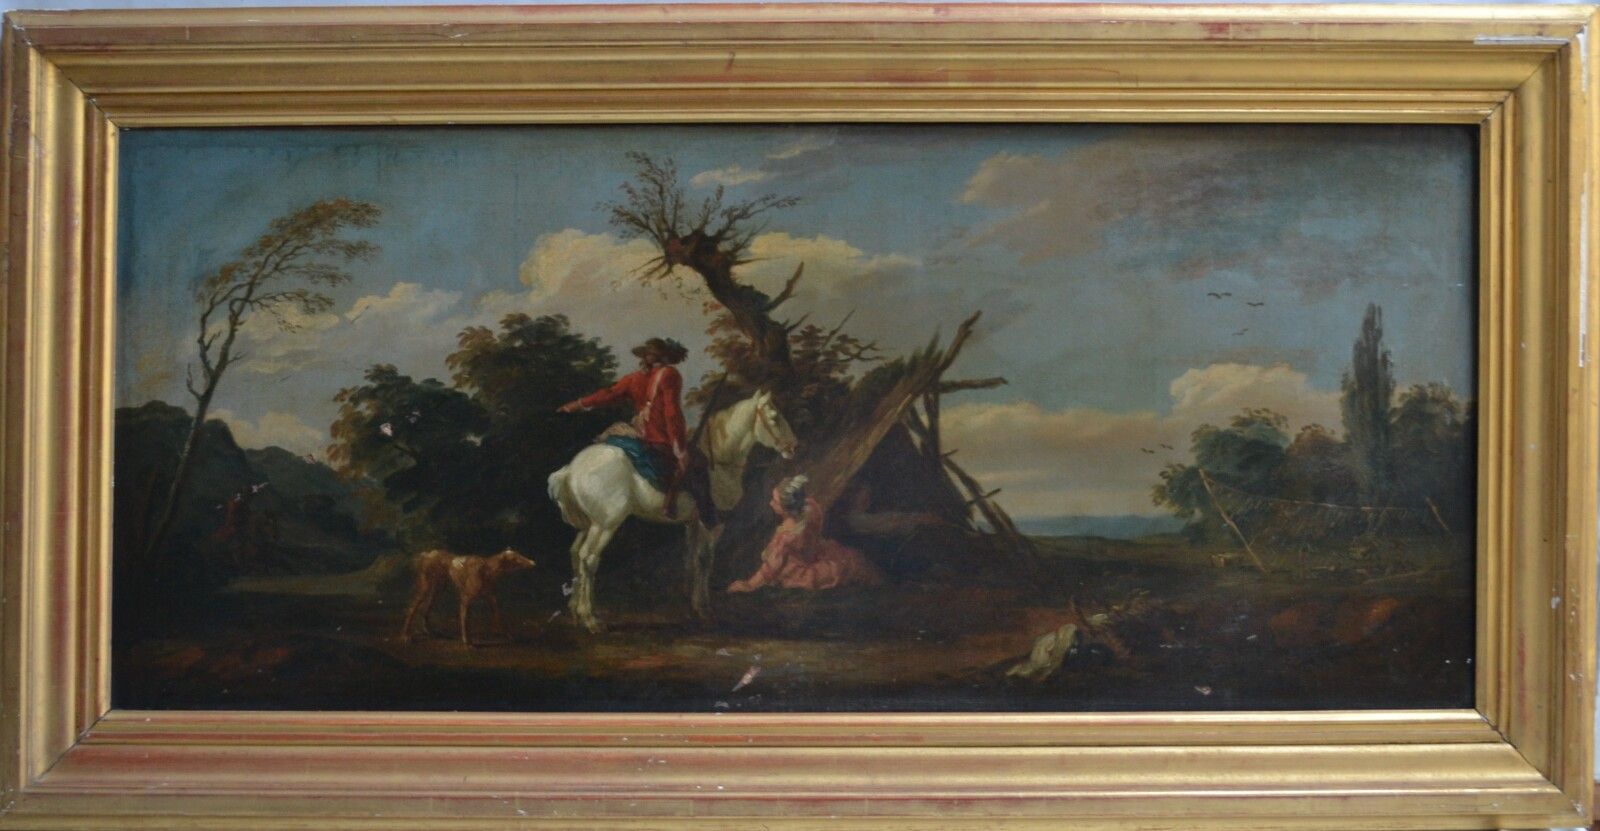 Null FRENCH SCHOOL of the 19th century

Scene of a camp

Oil on canvas

57 x 133&hellip;